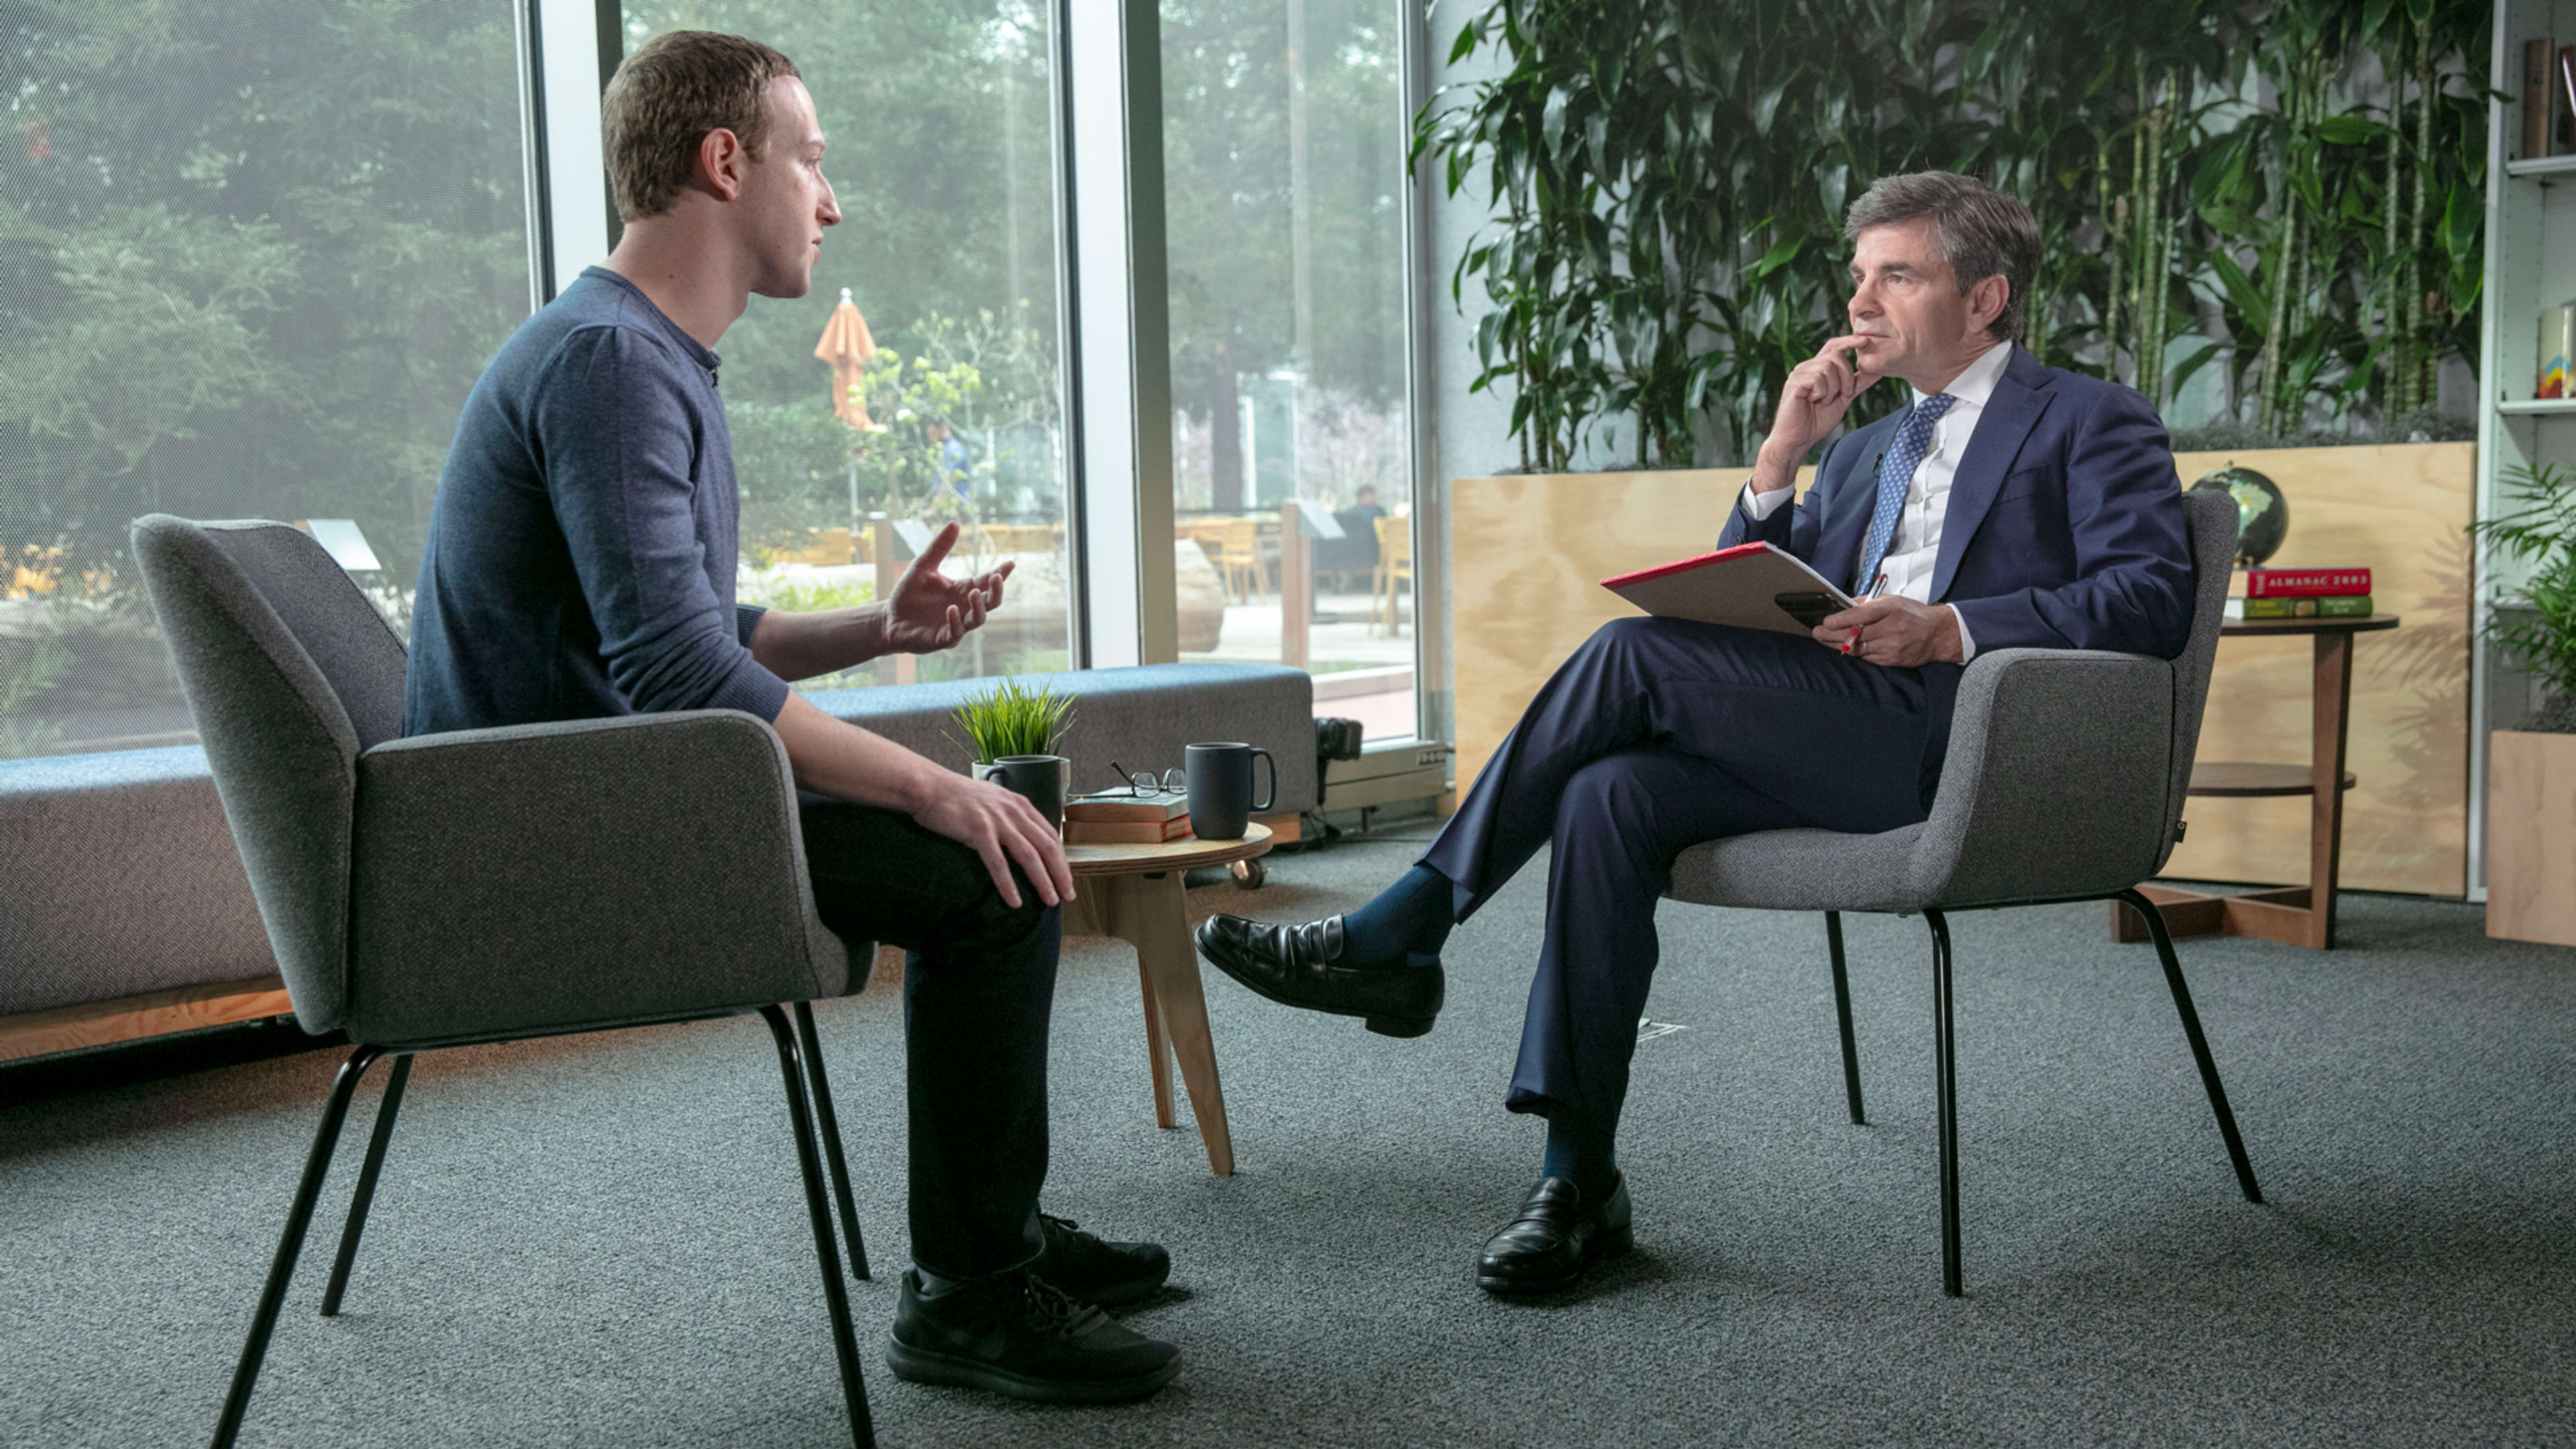 3 takeaways from Mark Zuckerberg’s “Good Morning America” interview today